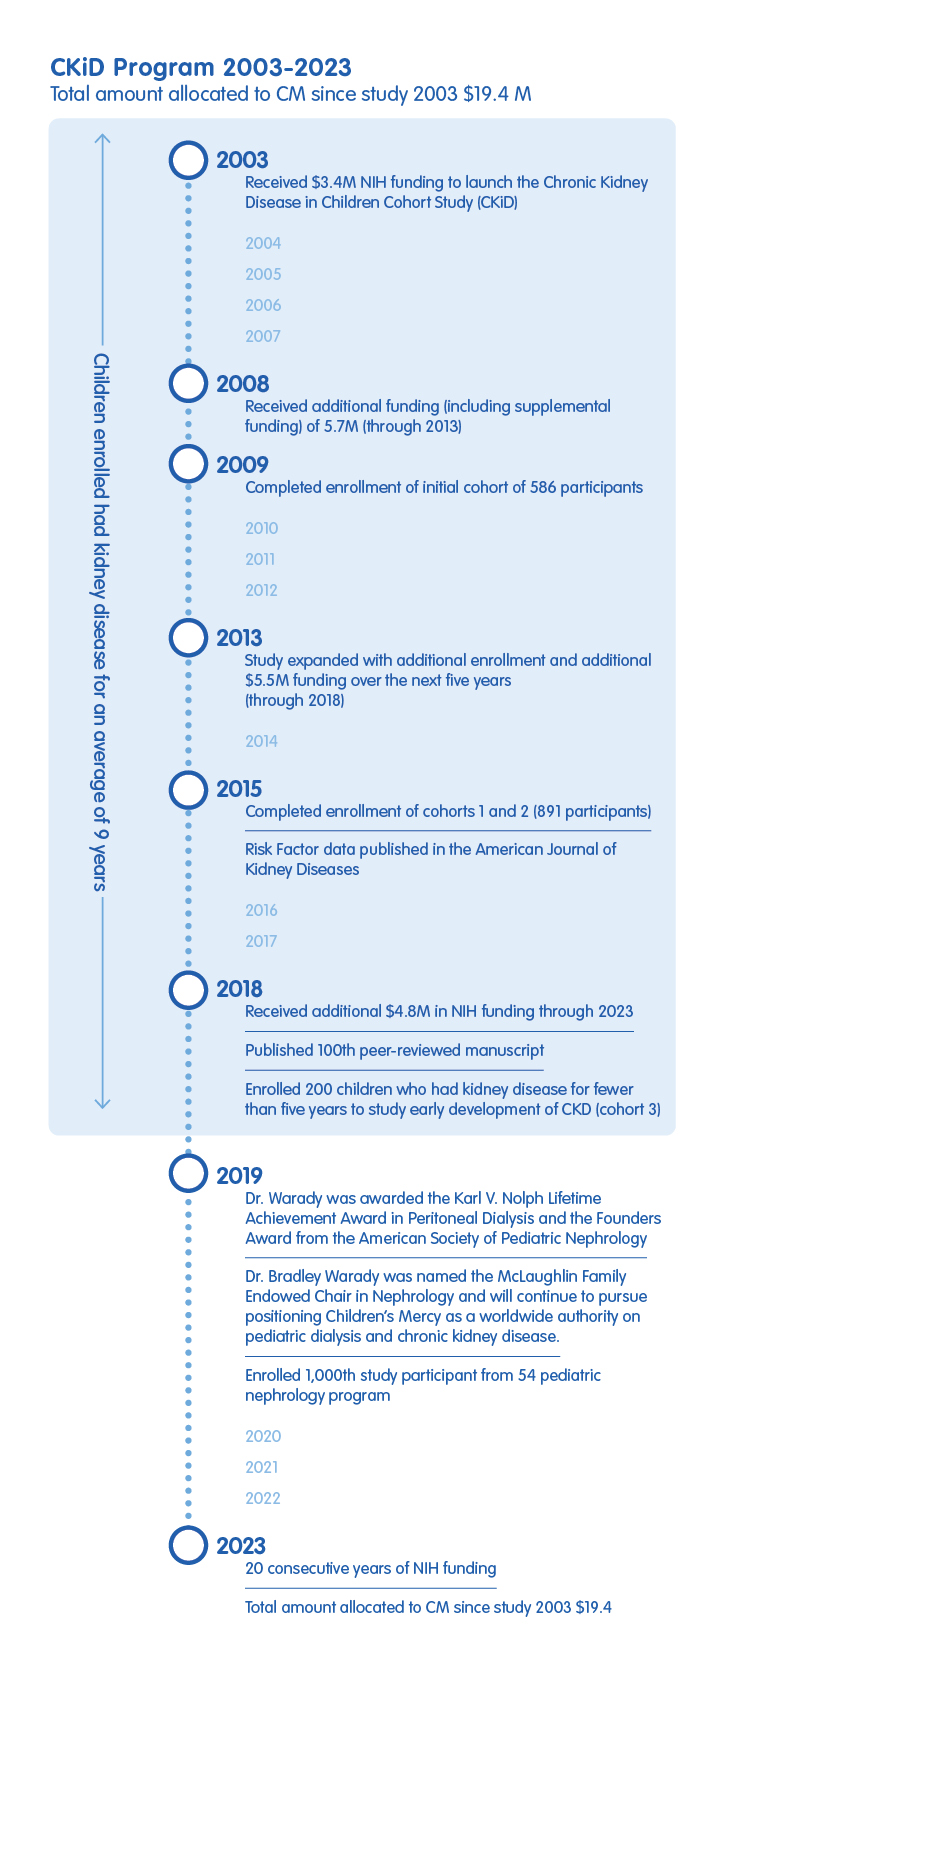 Timeline graphic with words "CKiD Program 2003-2023, Total amount allocated to CM since study 2003 $19.4 M"